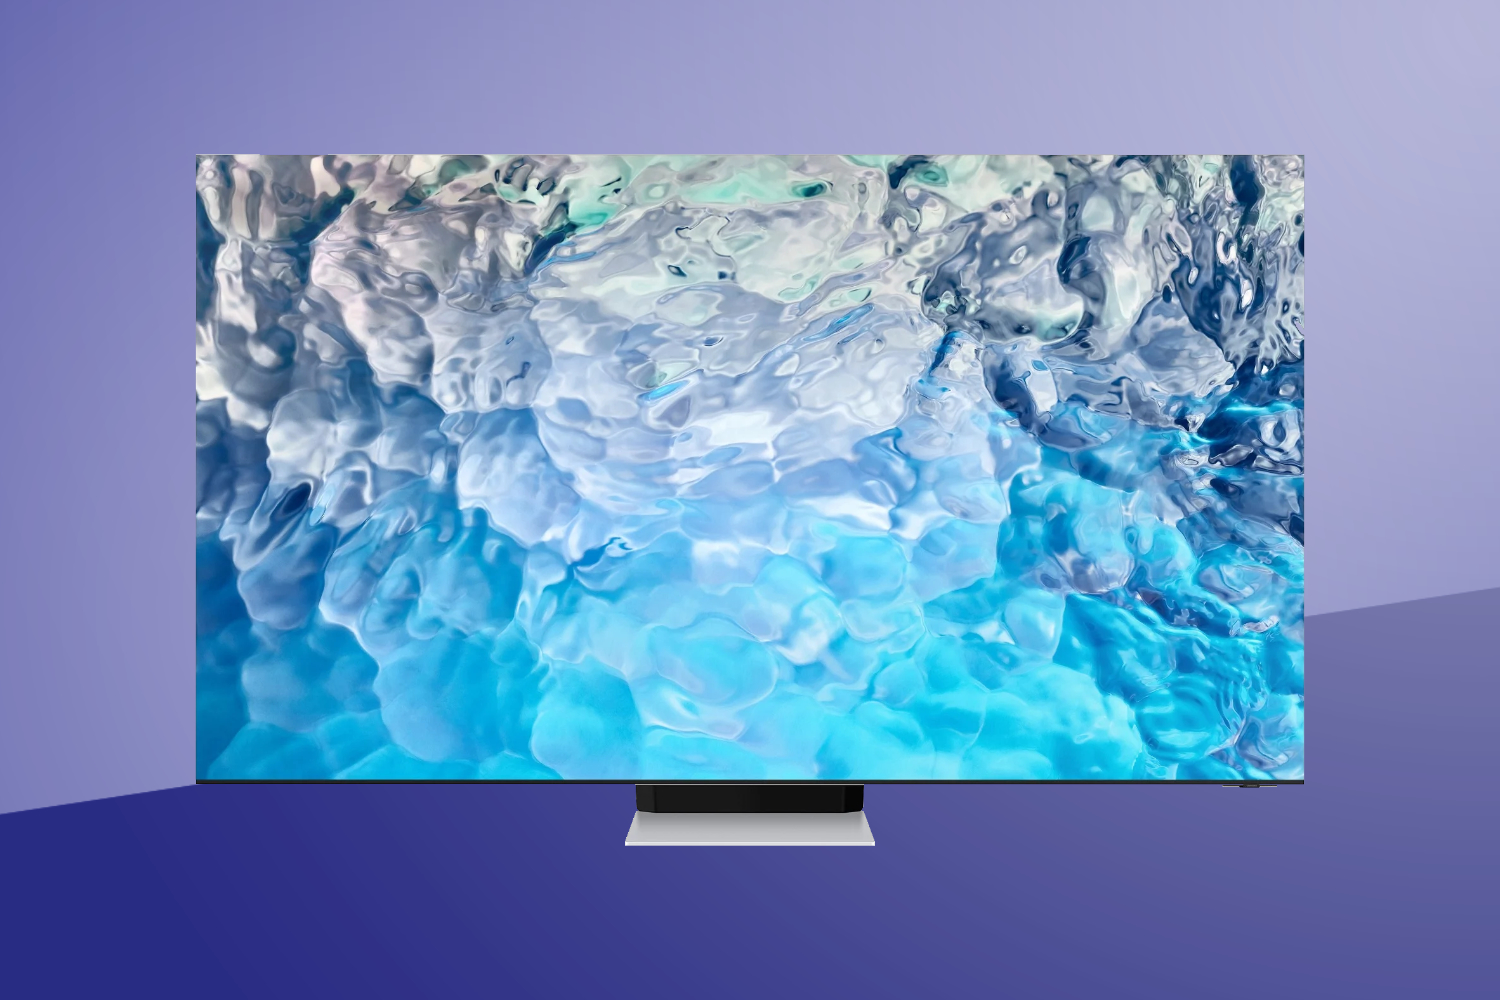 Samsung announces 2022 Neo QLED TV lineup will be available to pre